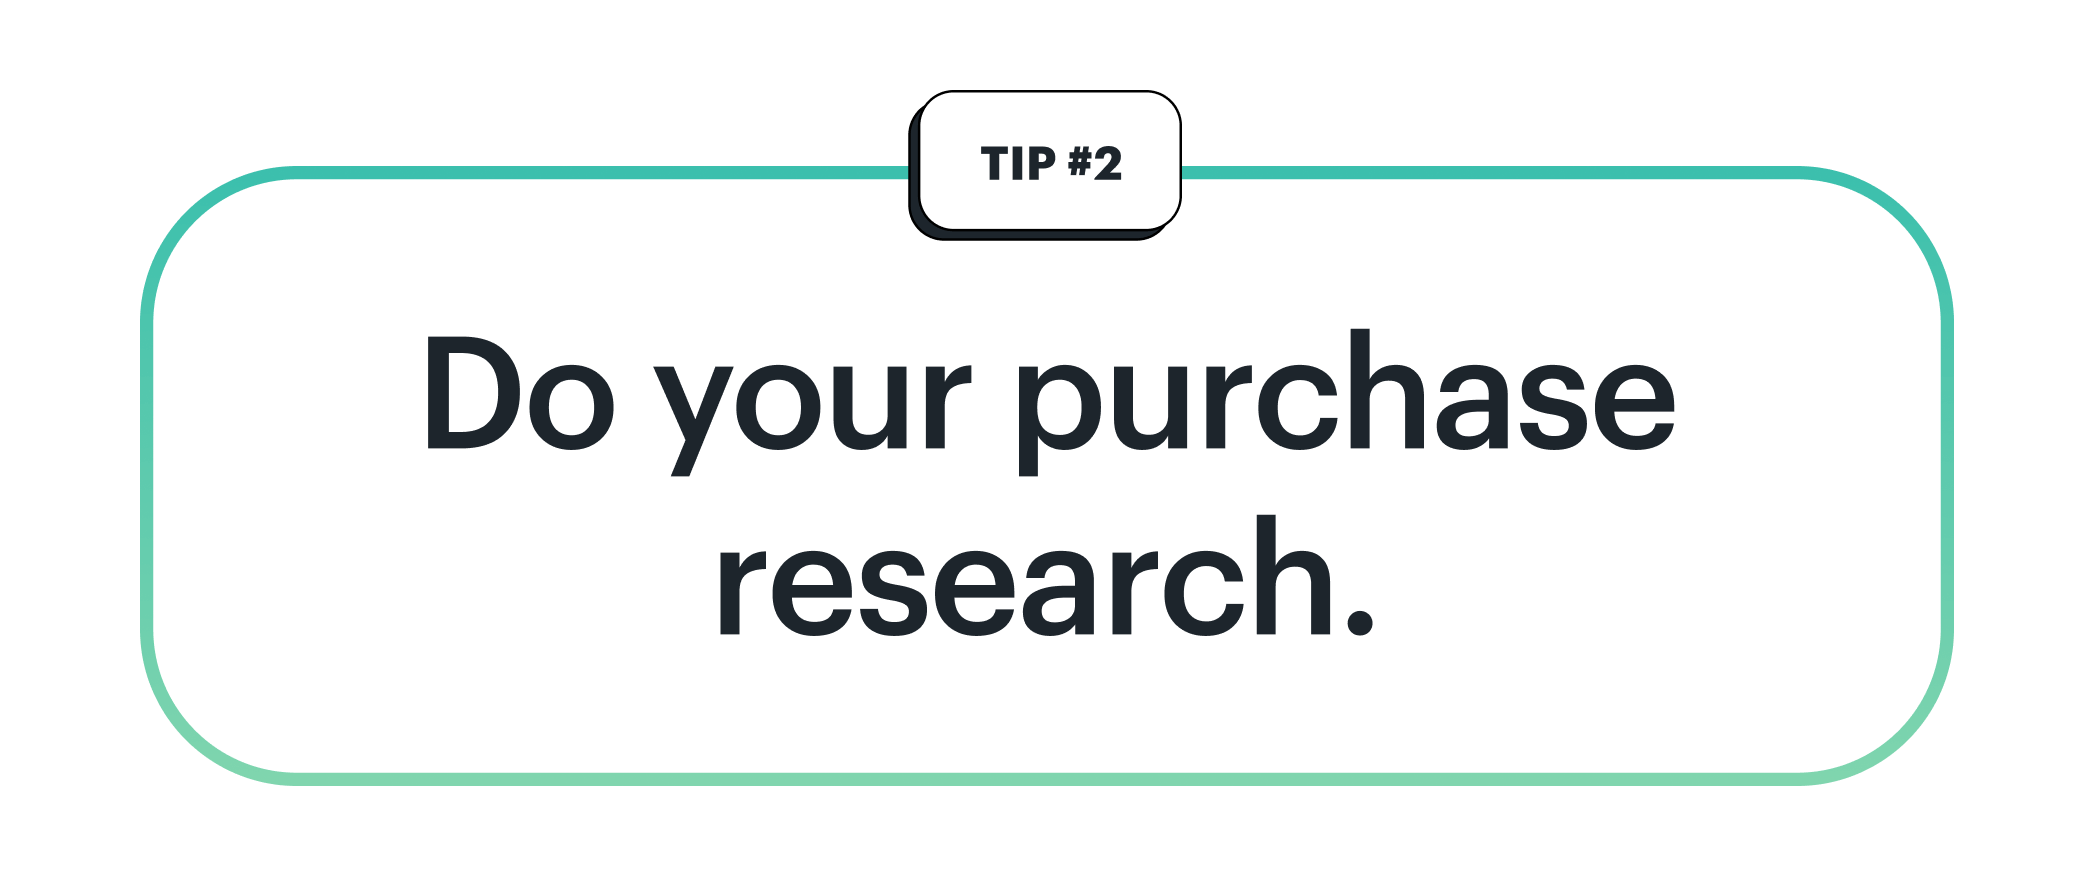 Tip 2: Do your purchase research